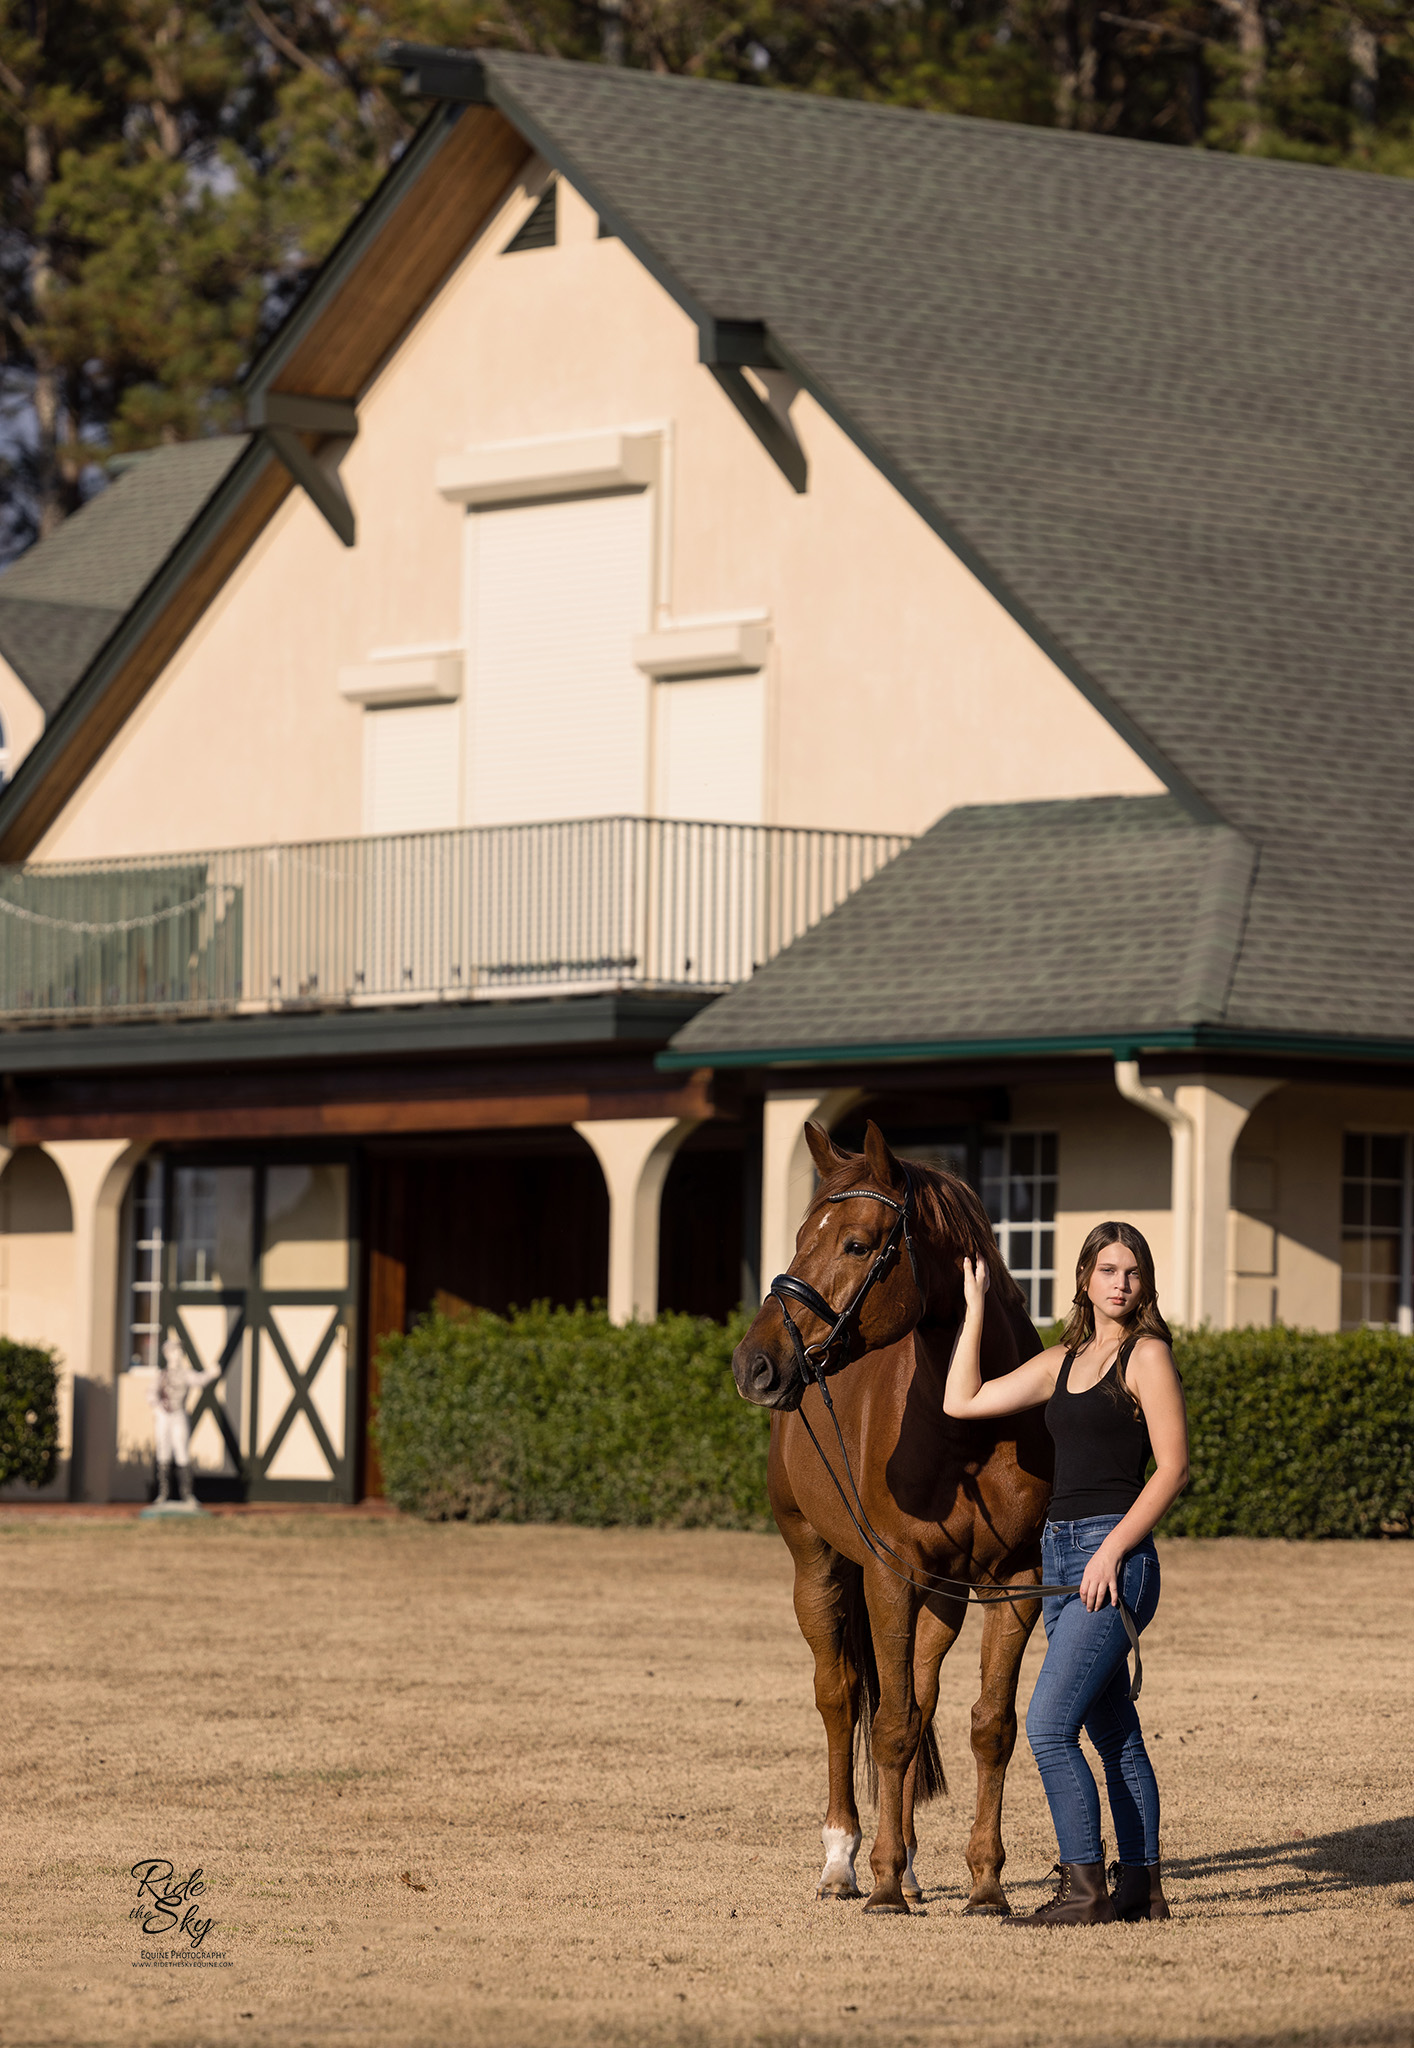 High School Senior Equestran posed with her horse at Le Bonheur Equestrian in Chatsworth, GA